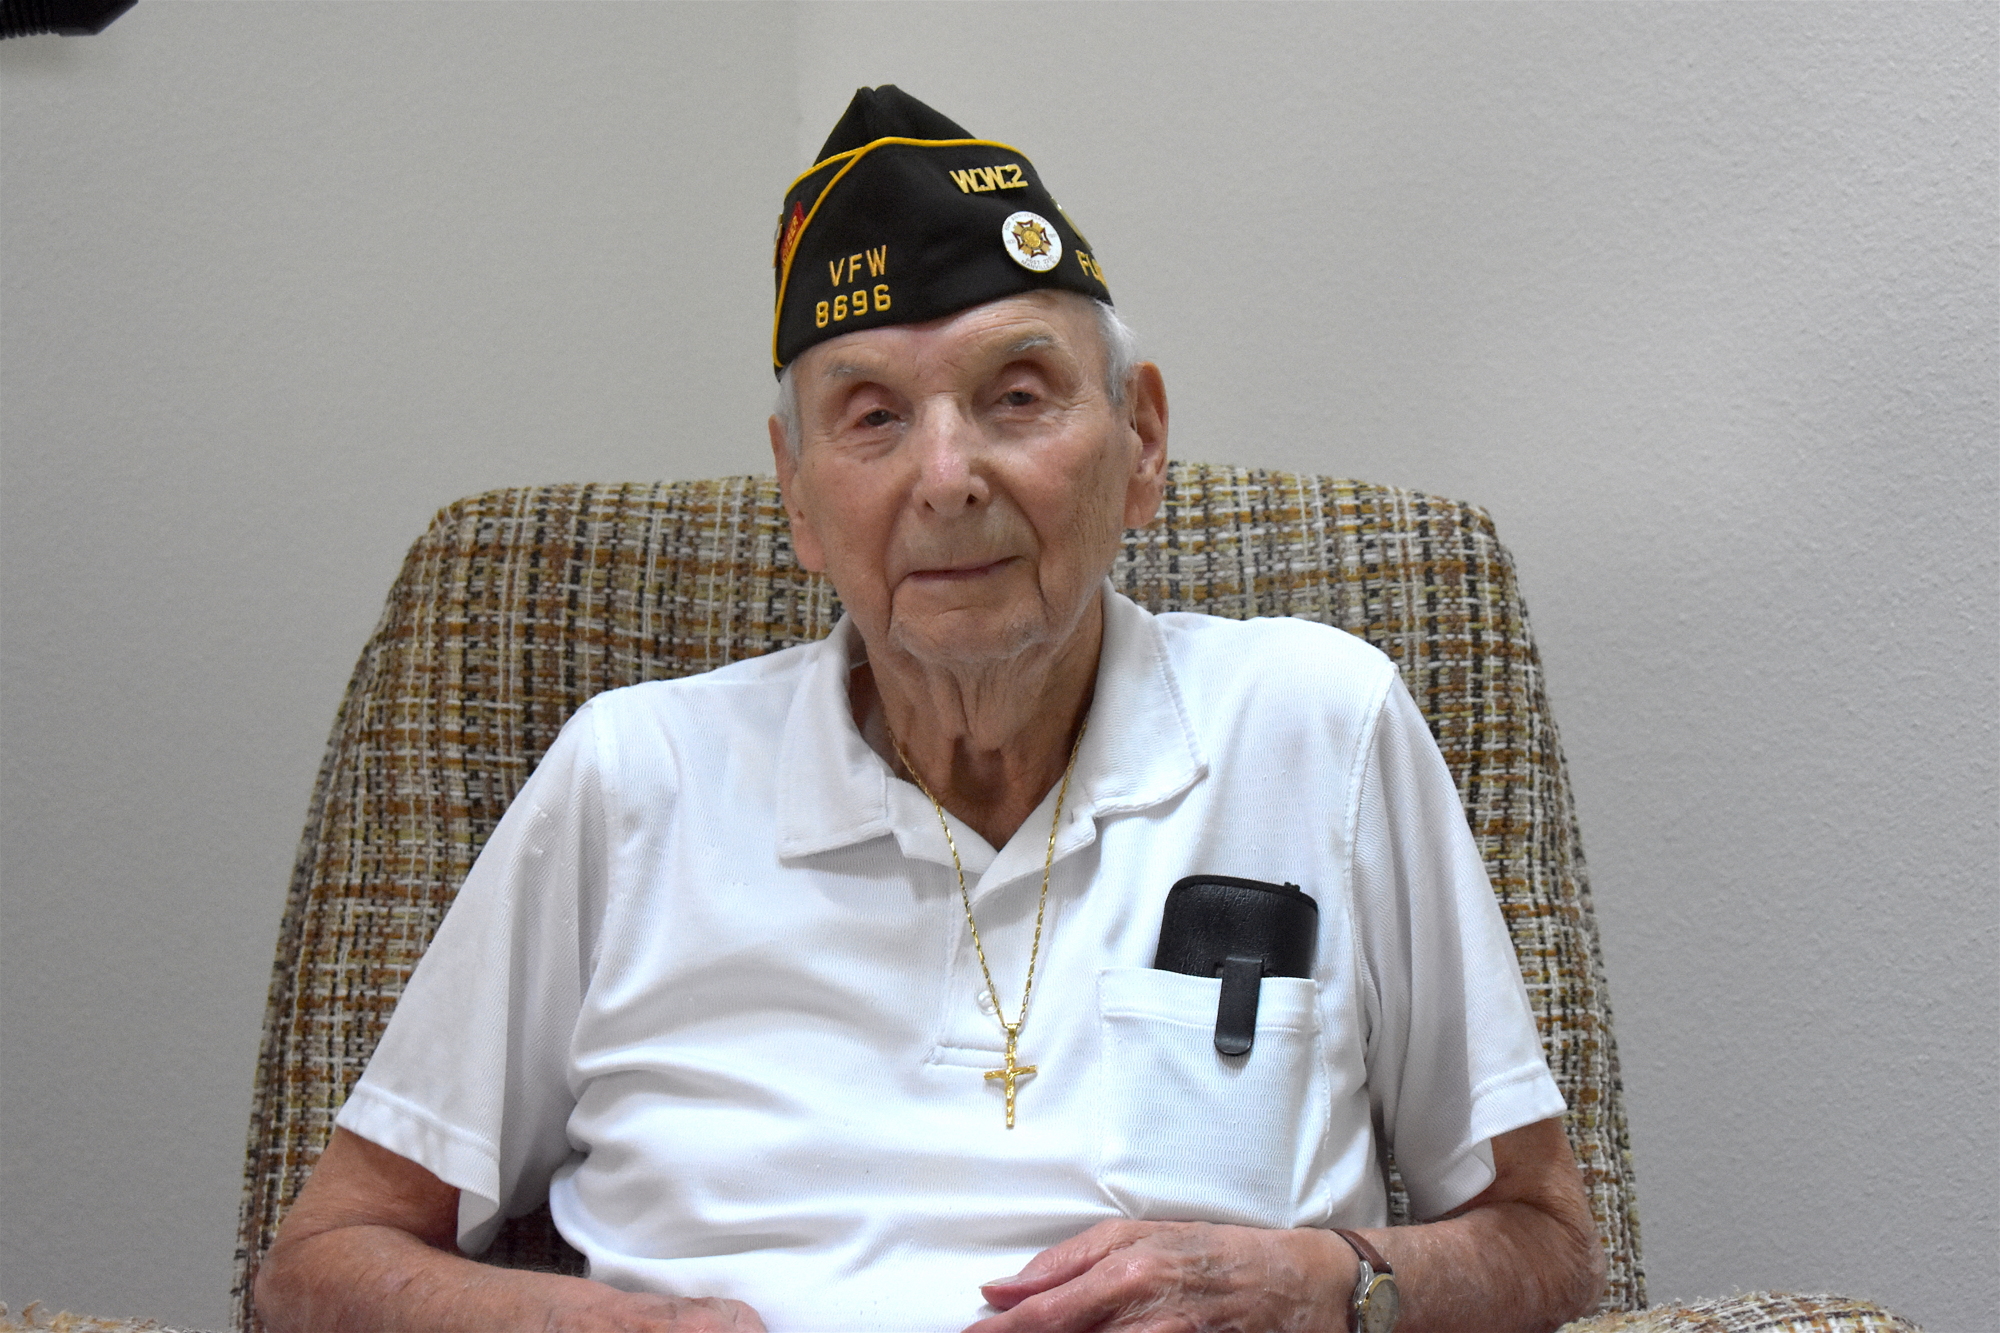 John Vidota is active in the local VFW 8696 as a member and in the honor guard.